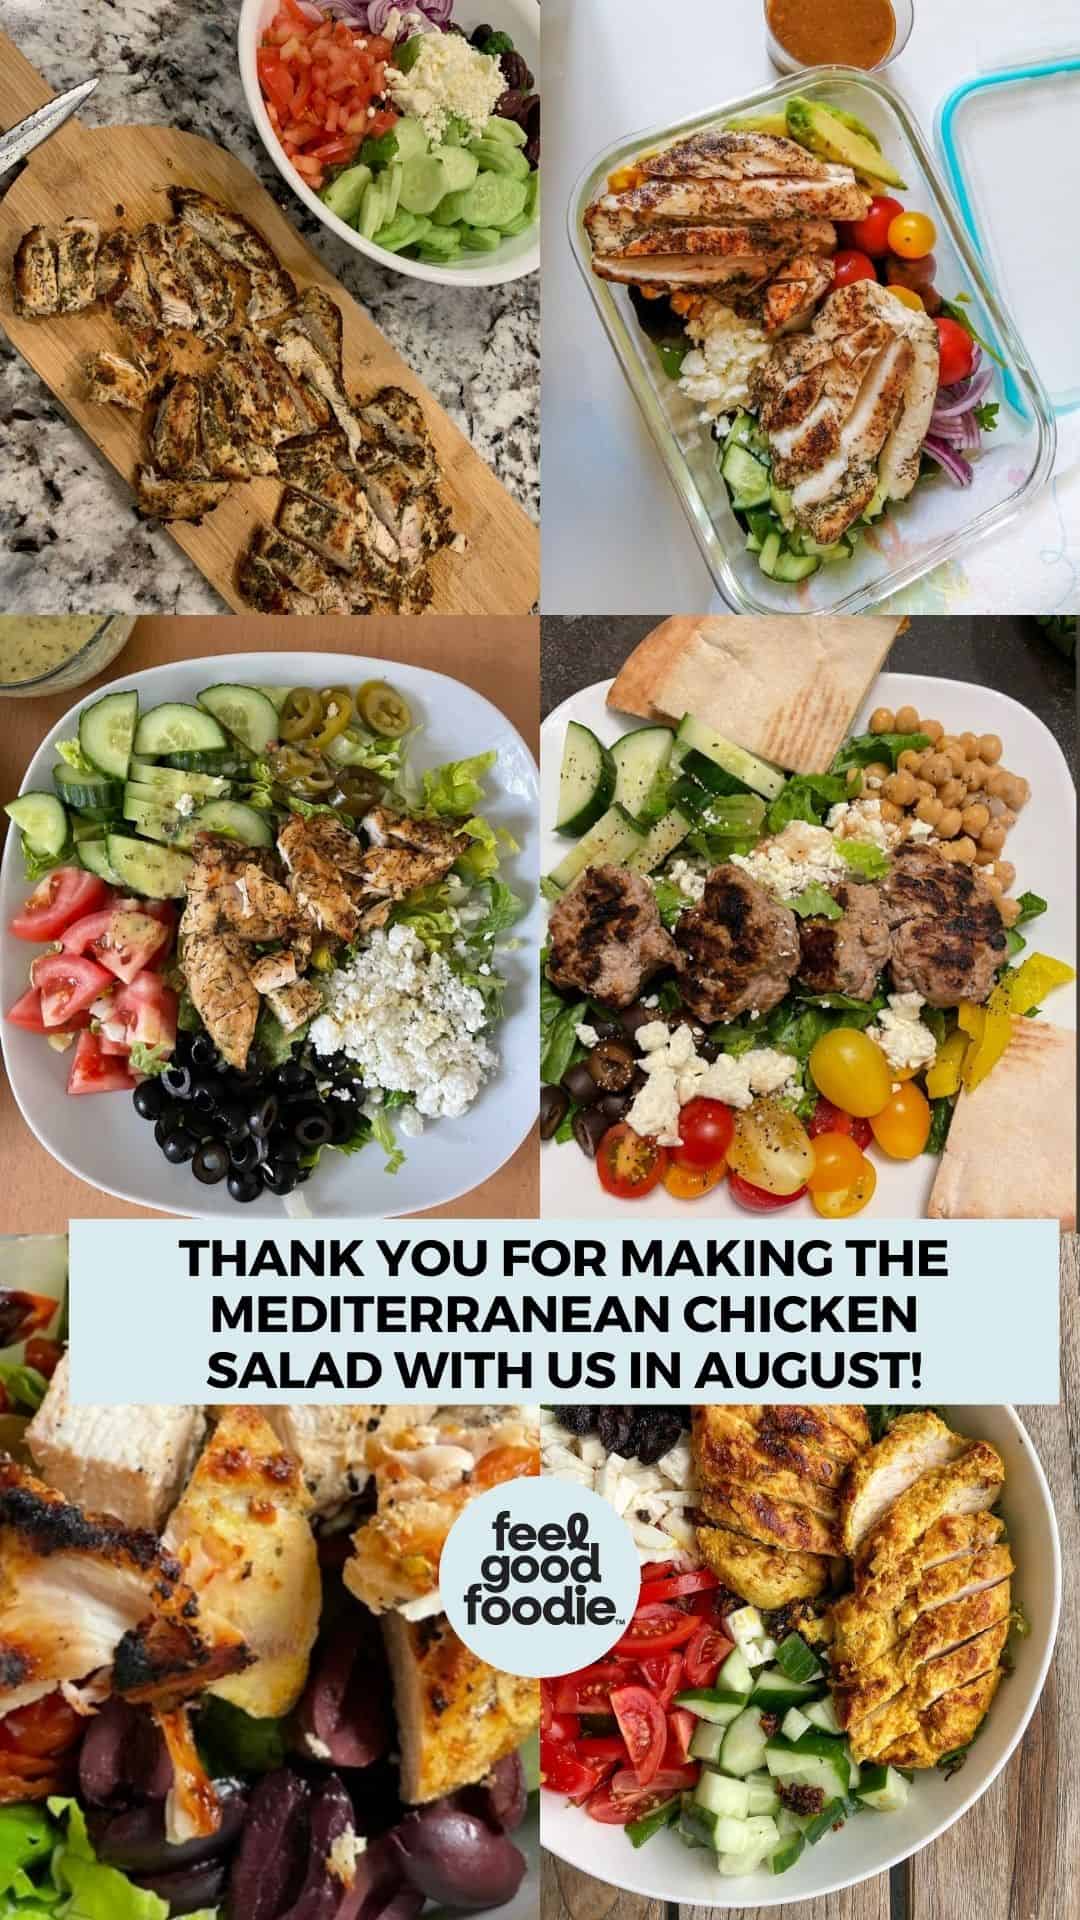 August Cooking Challenge Results and Photos